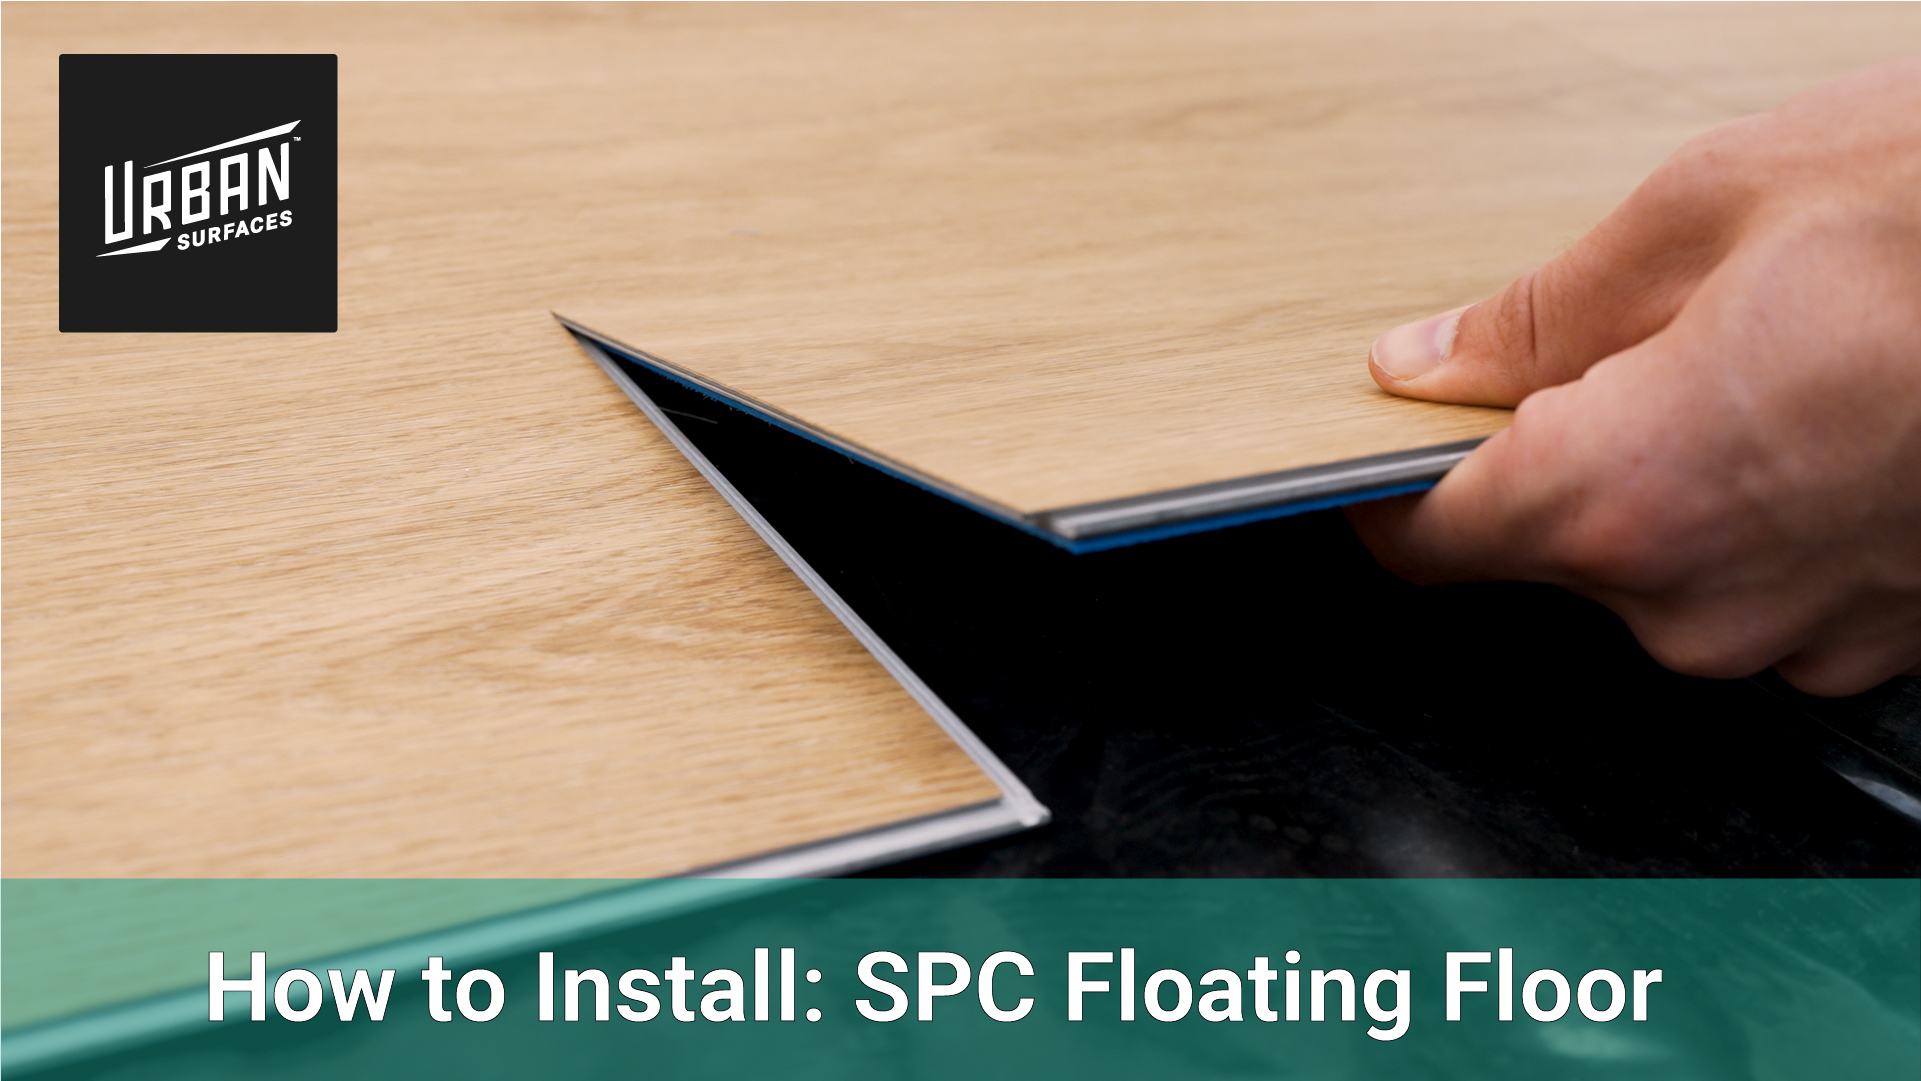 What is a Floating Floor?